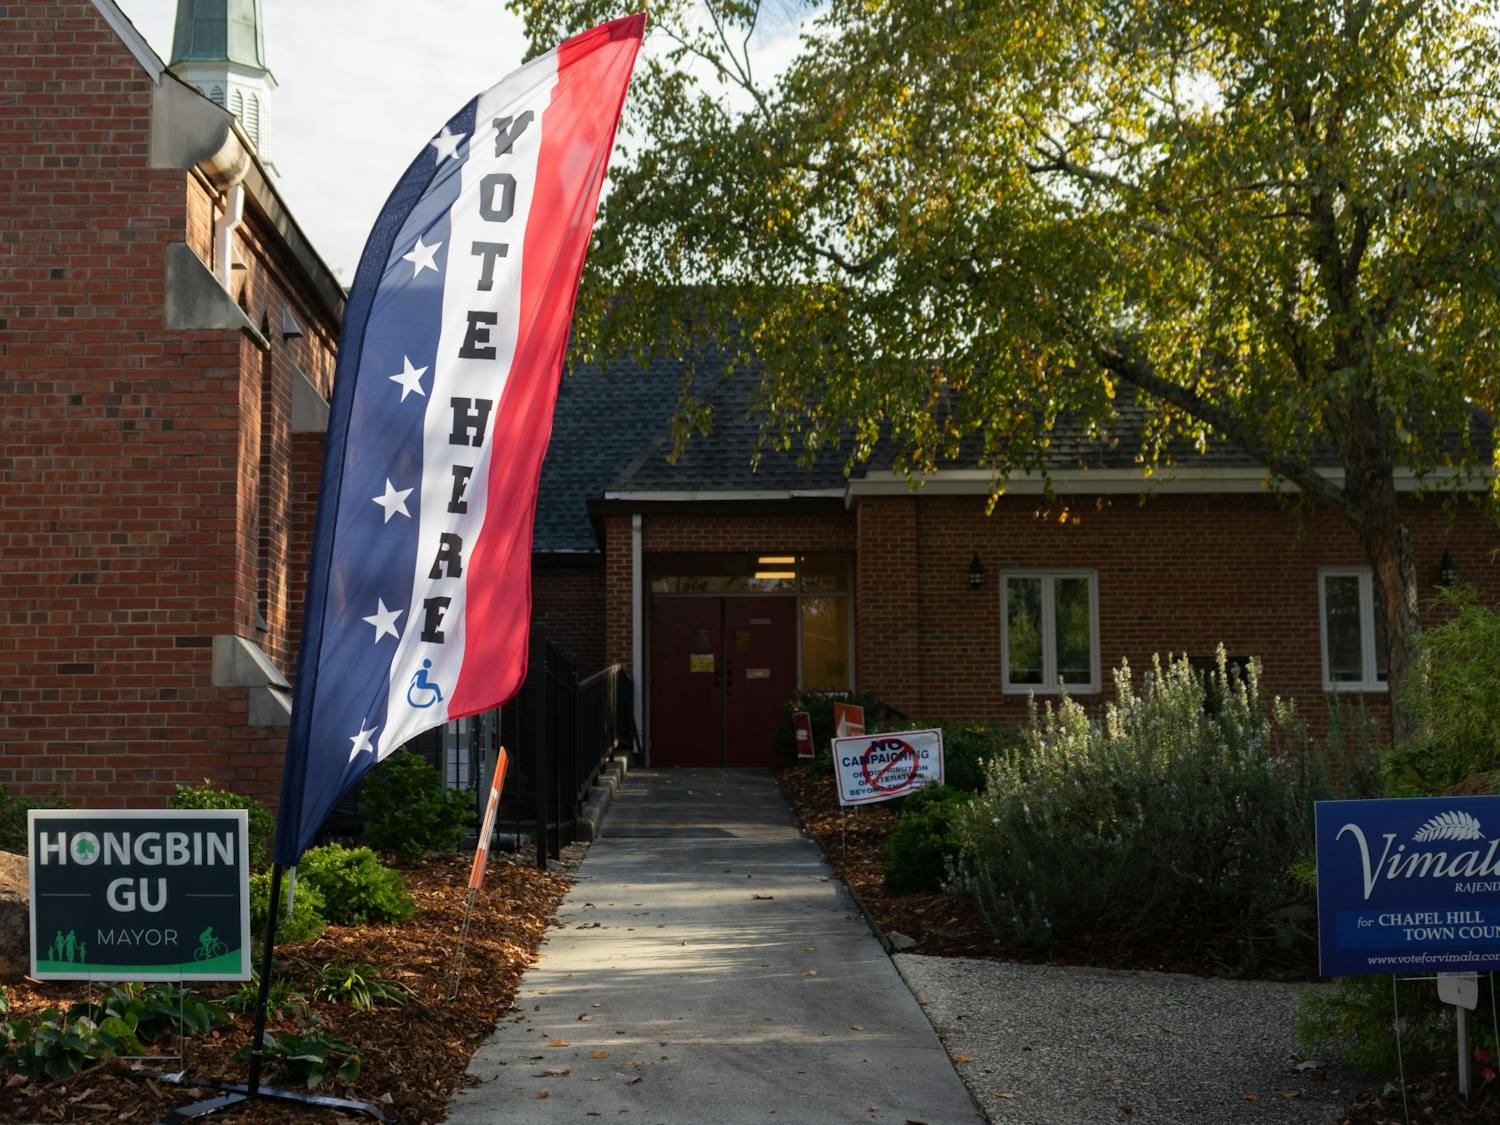 The East Franklin voting precinct pictured on Election Day, Nov. 2, 2021.